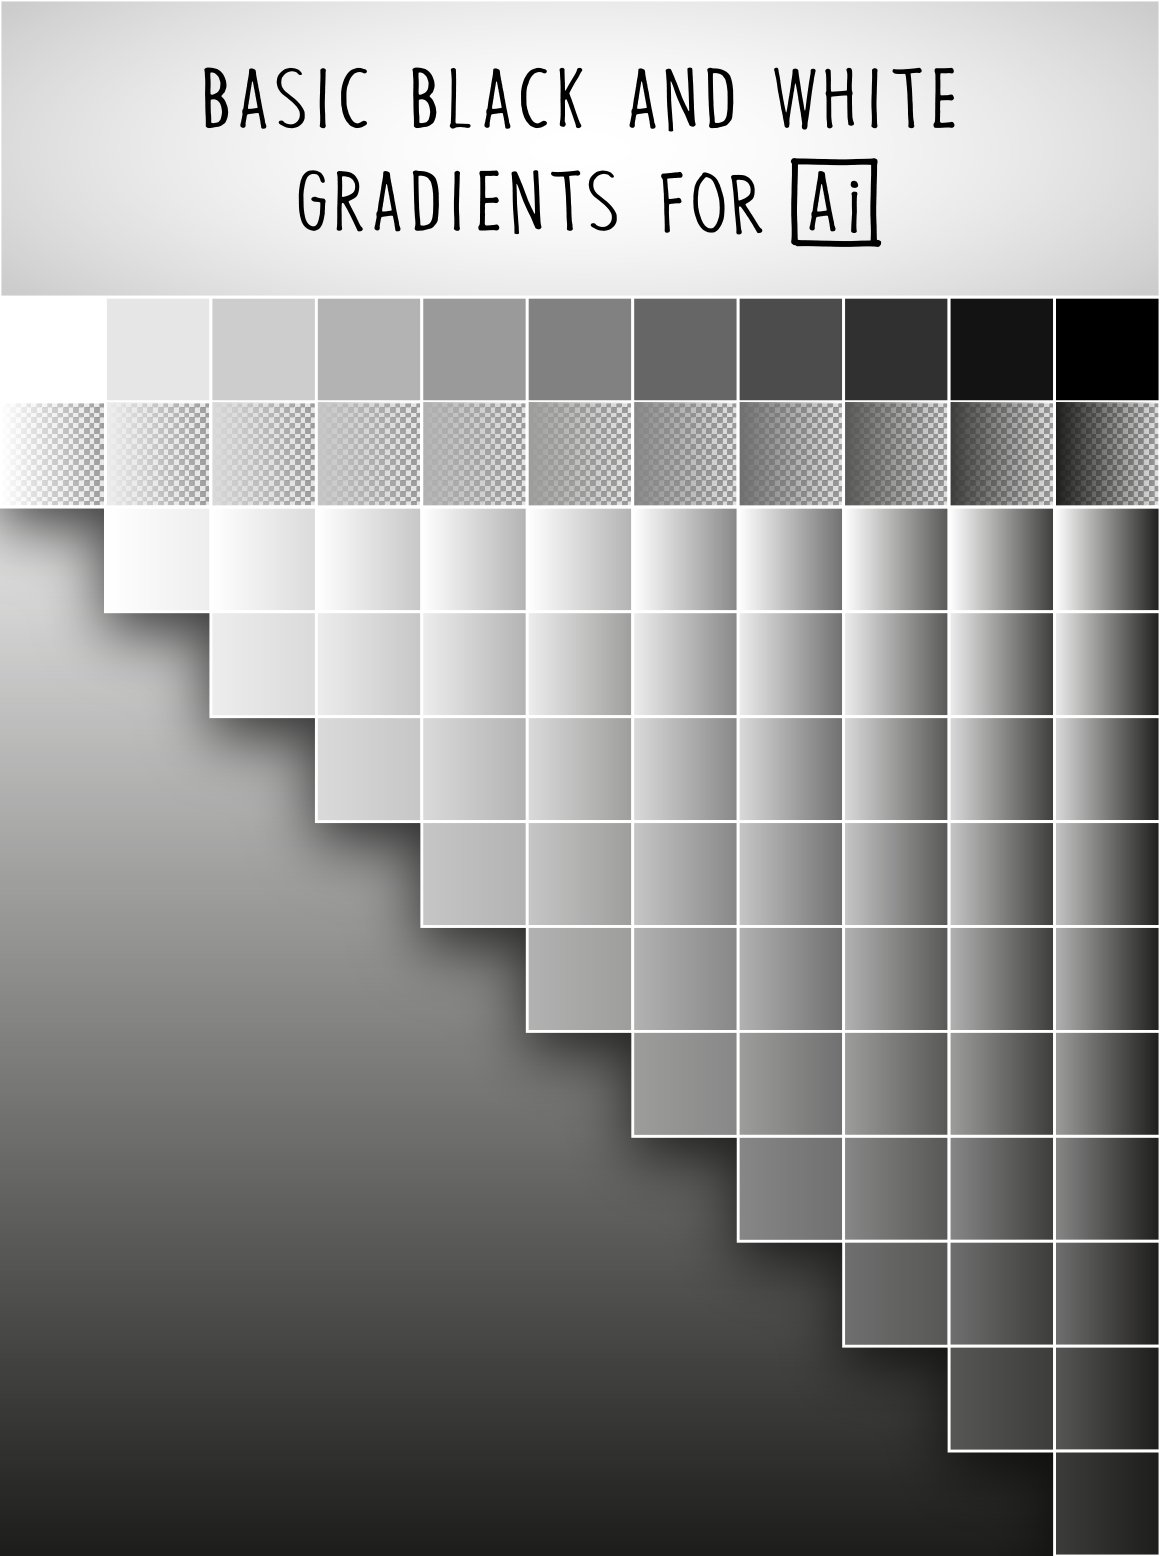 65 BASIC BLACK AND WHITE GRADIENTS cover image.